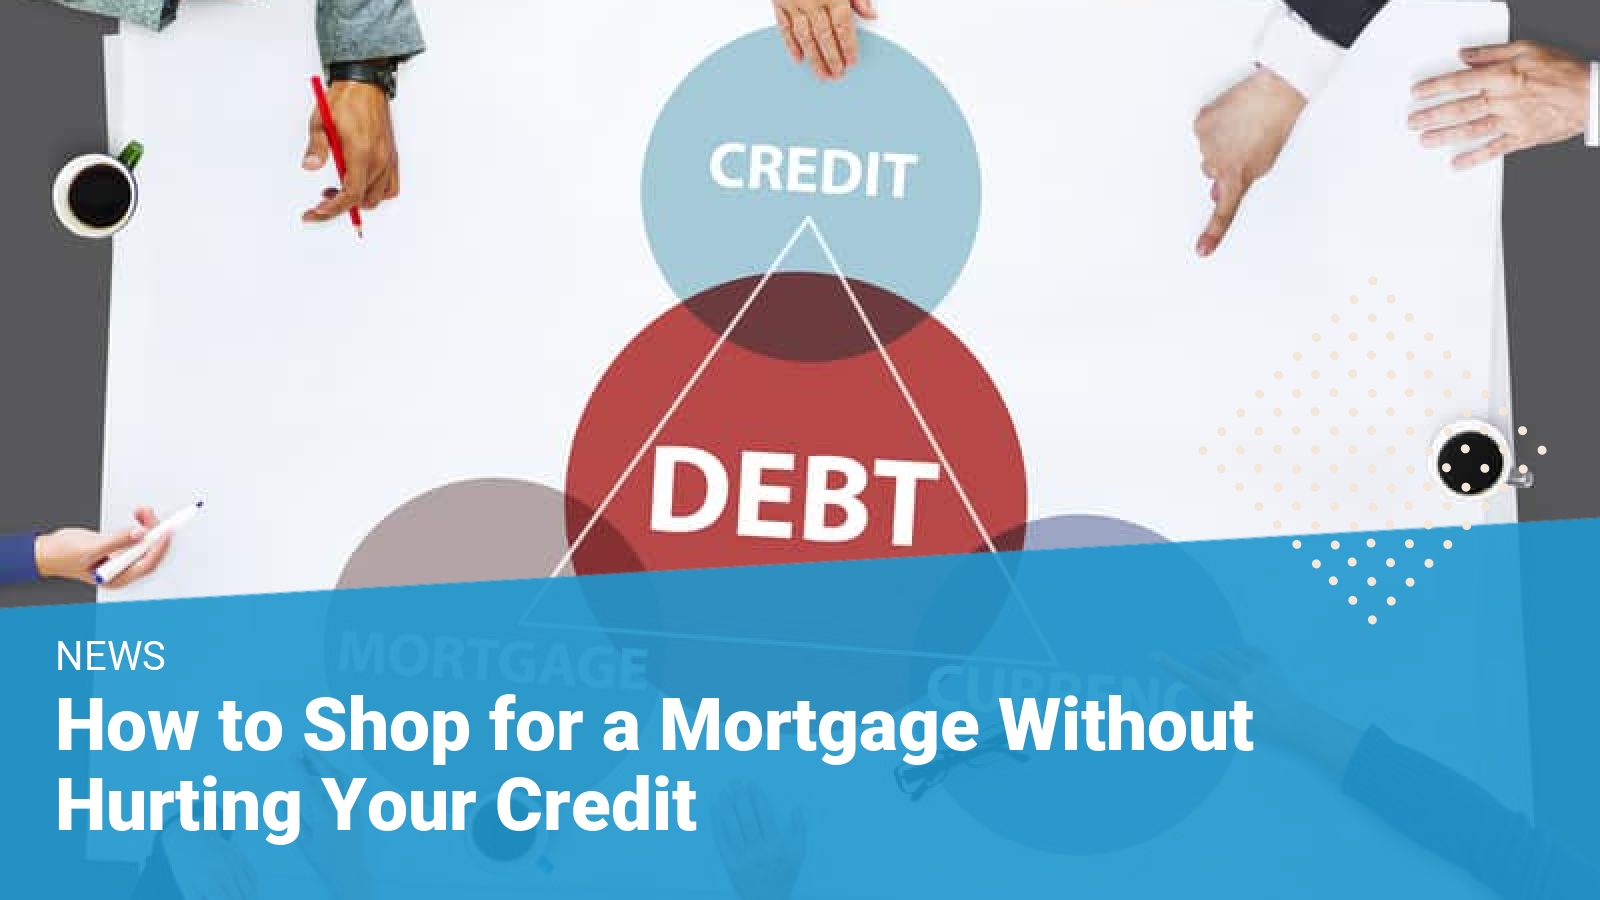 How to Get a Mortgage Without Ruining Your Credit